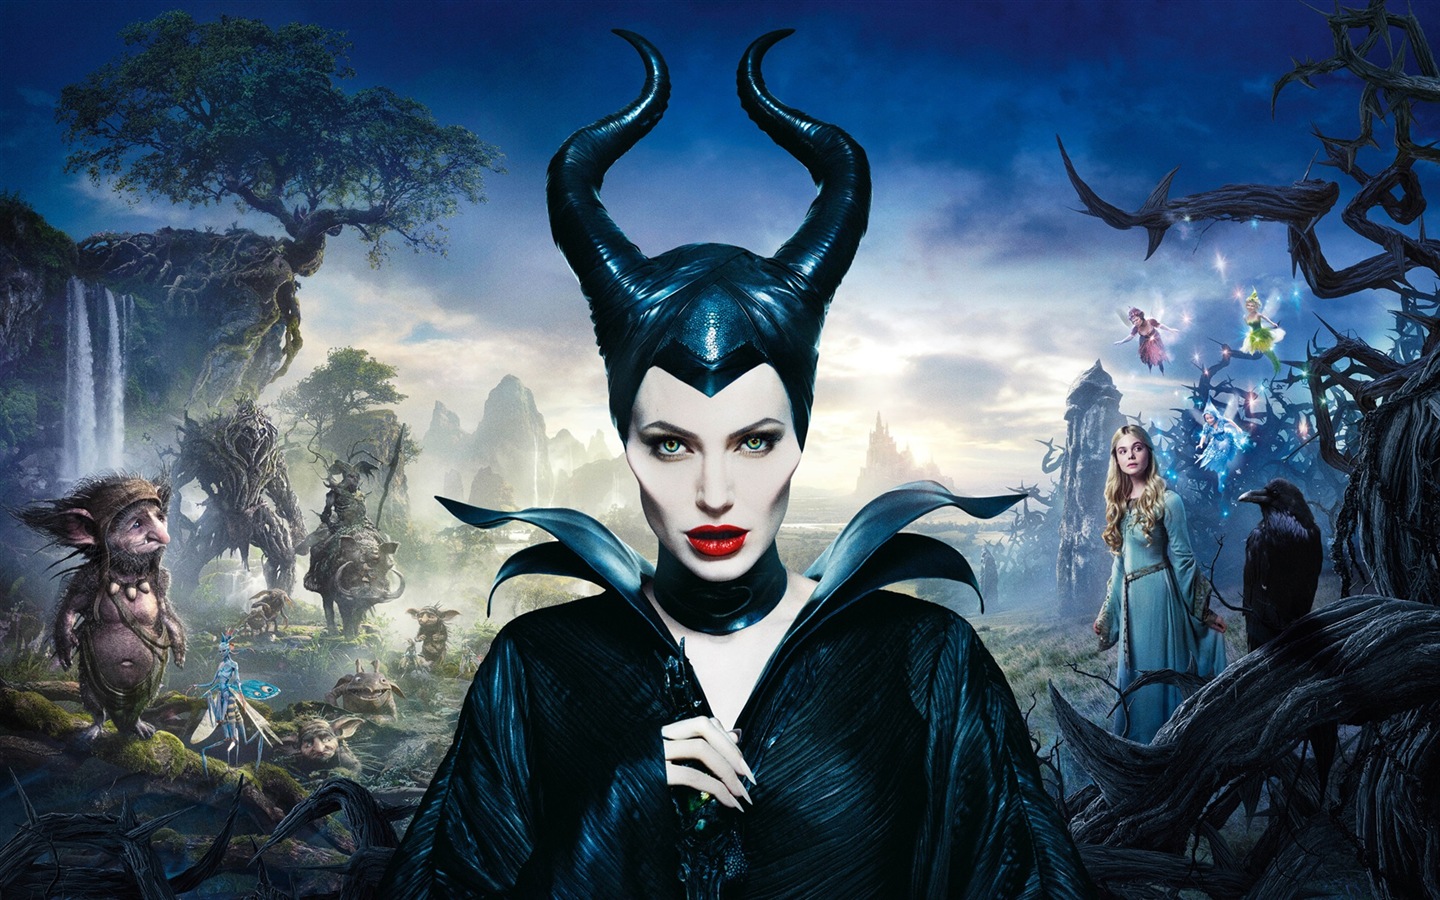 Maleficent 2014 HD movie wallpapers #6 - 1440x900